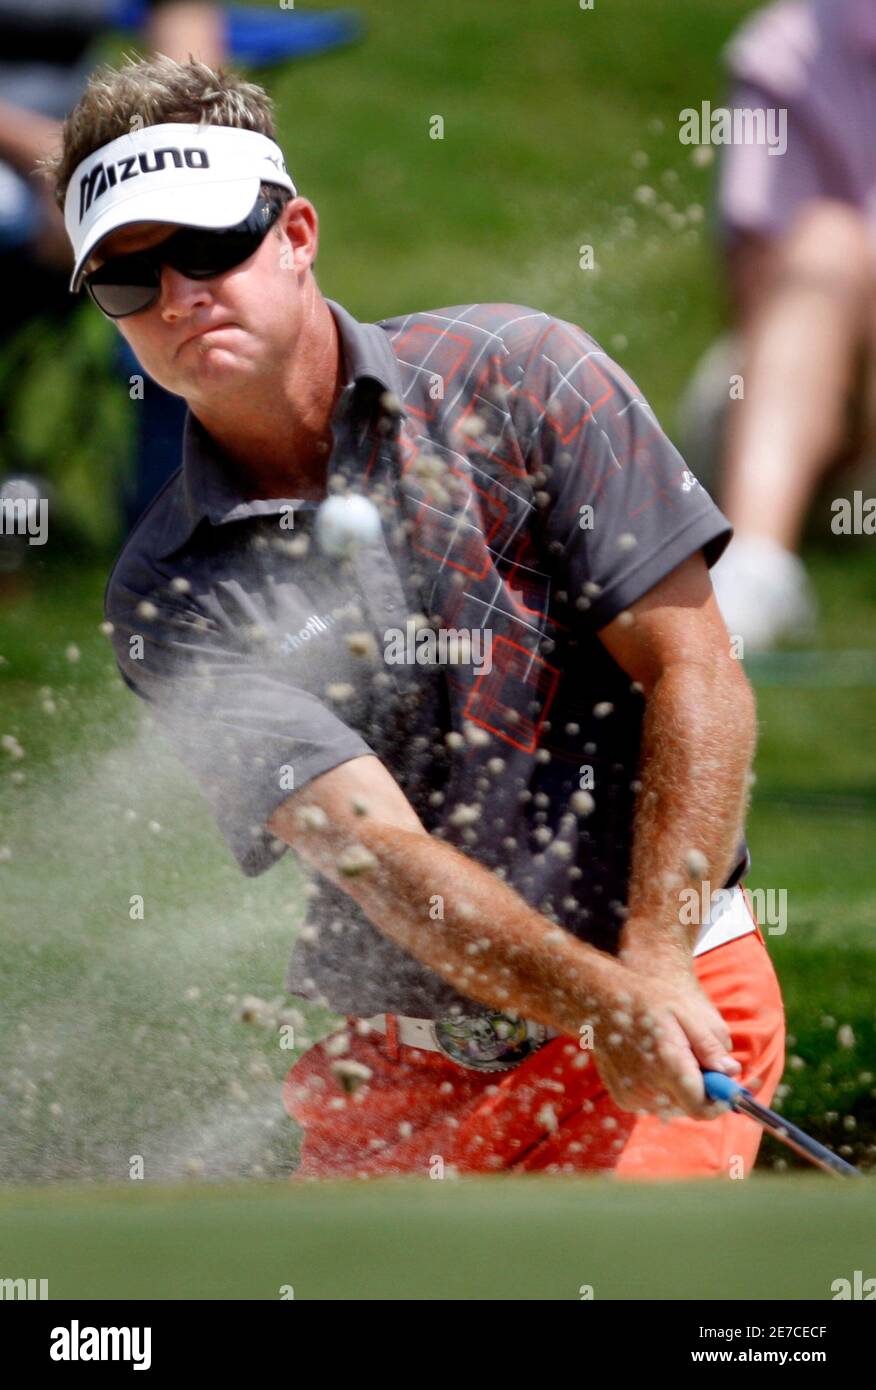 Brian Gay of the U.S. hits out of a greenside bunker on the ninth green during the third round of the St. Jude Classic golf tournament at TPC Southwind in Memphis, Tennessee June 13, 2009.   REUTERS/Nikki Boertman    (UNITED STATES SPORT GOLF) Stock Photo